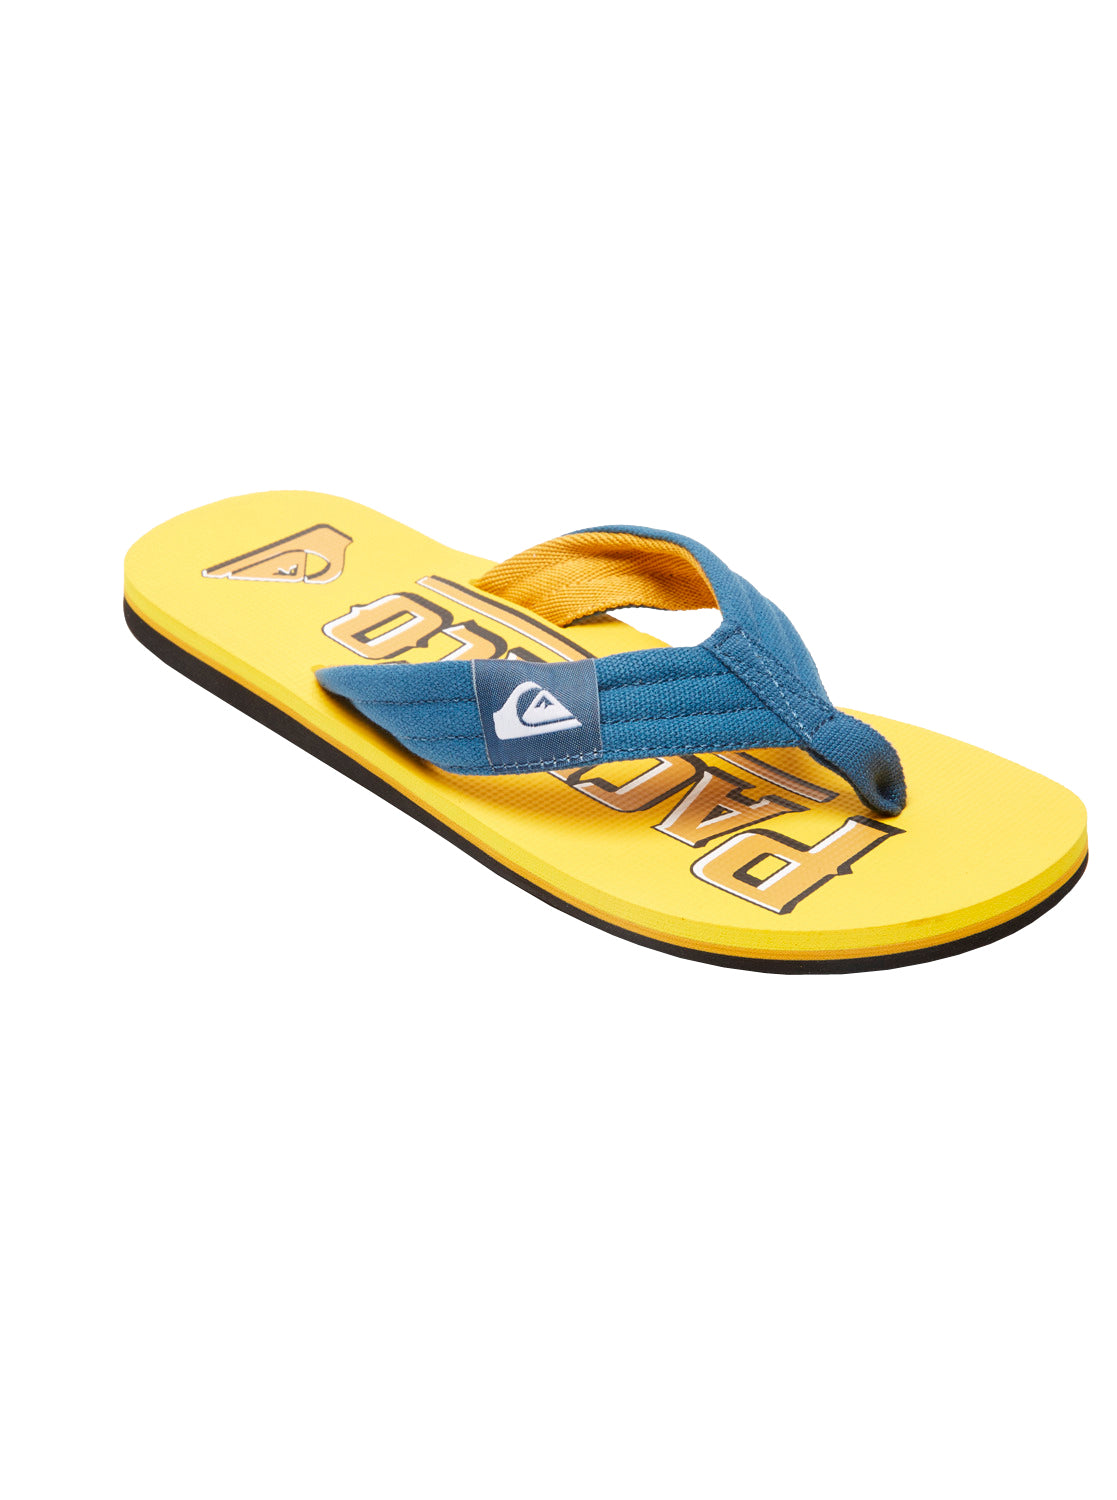 Quiksilver X Pacifico Layback Sandal XKKY 8